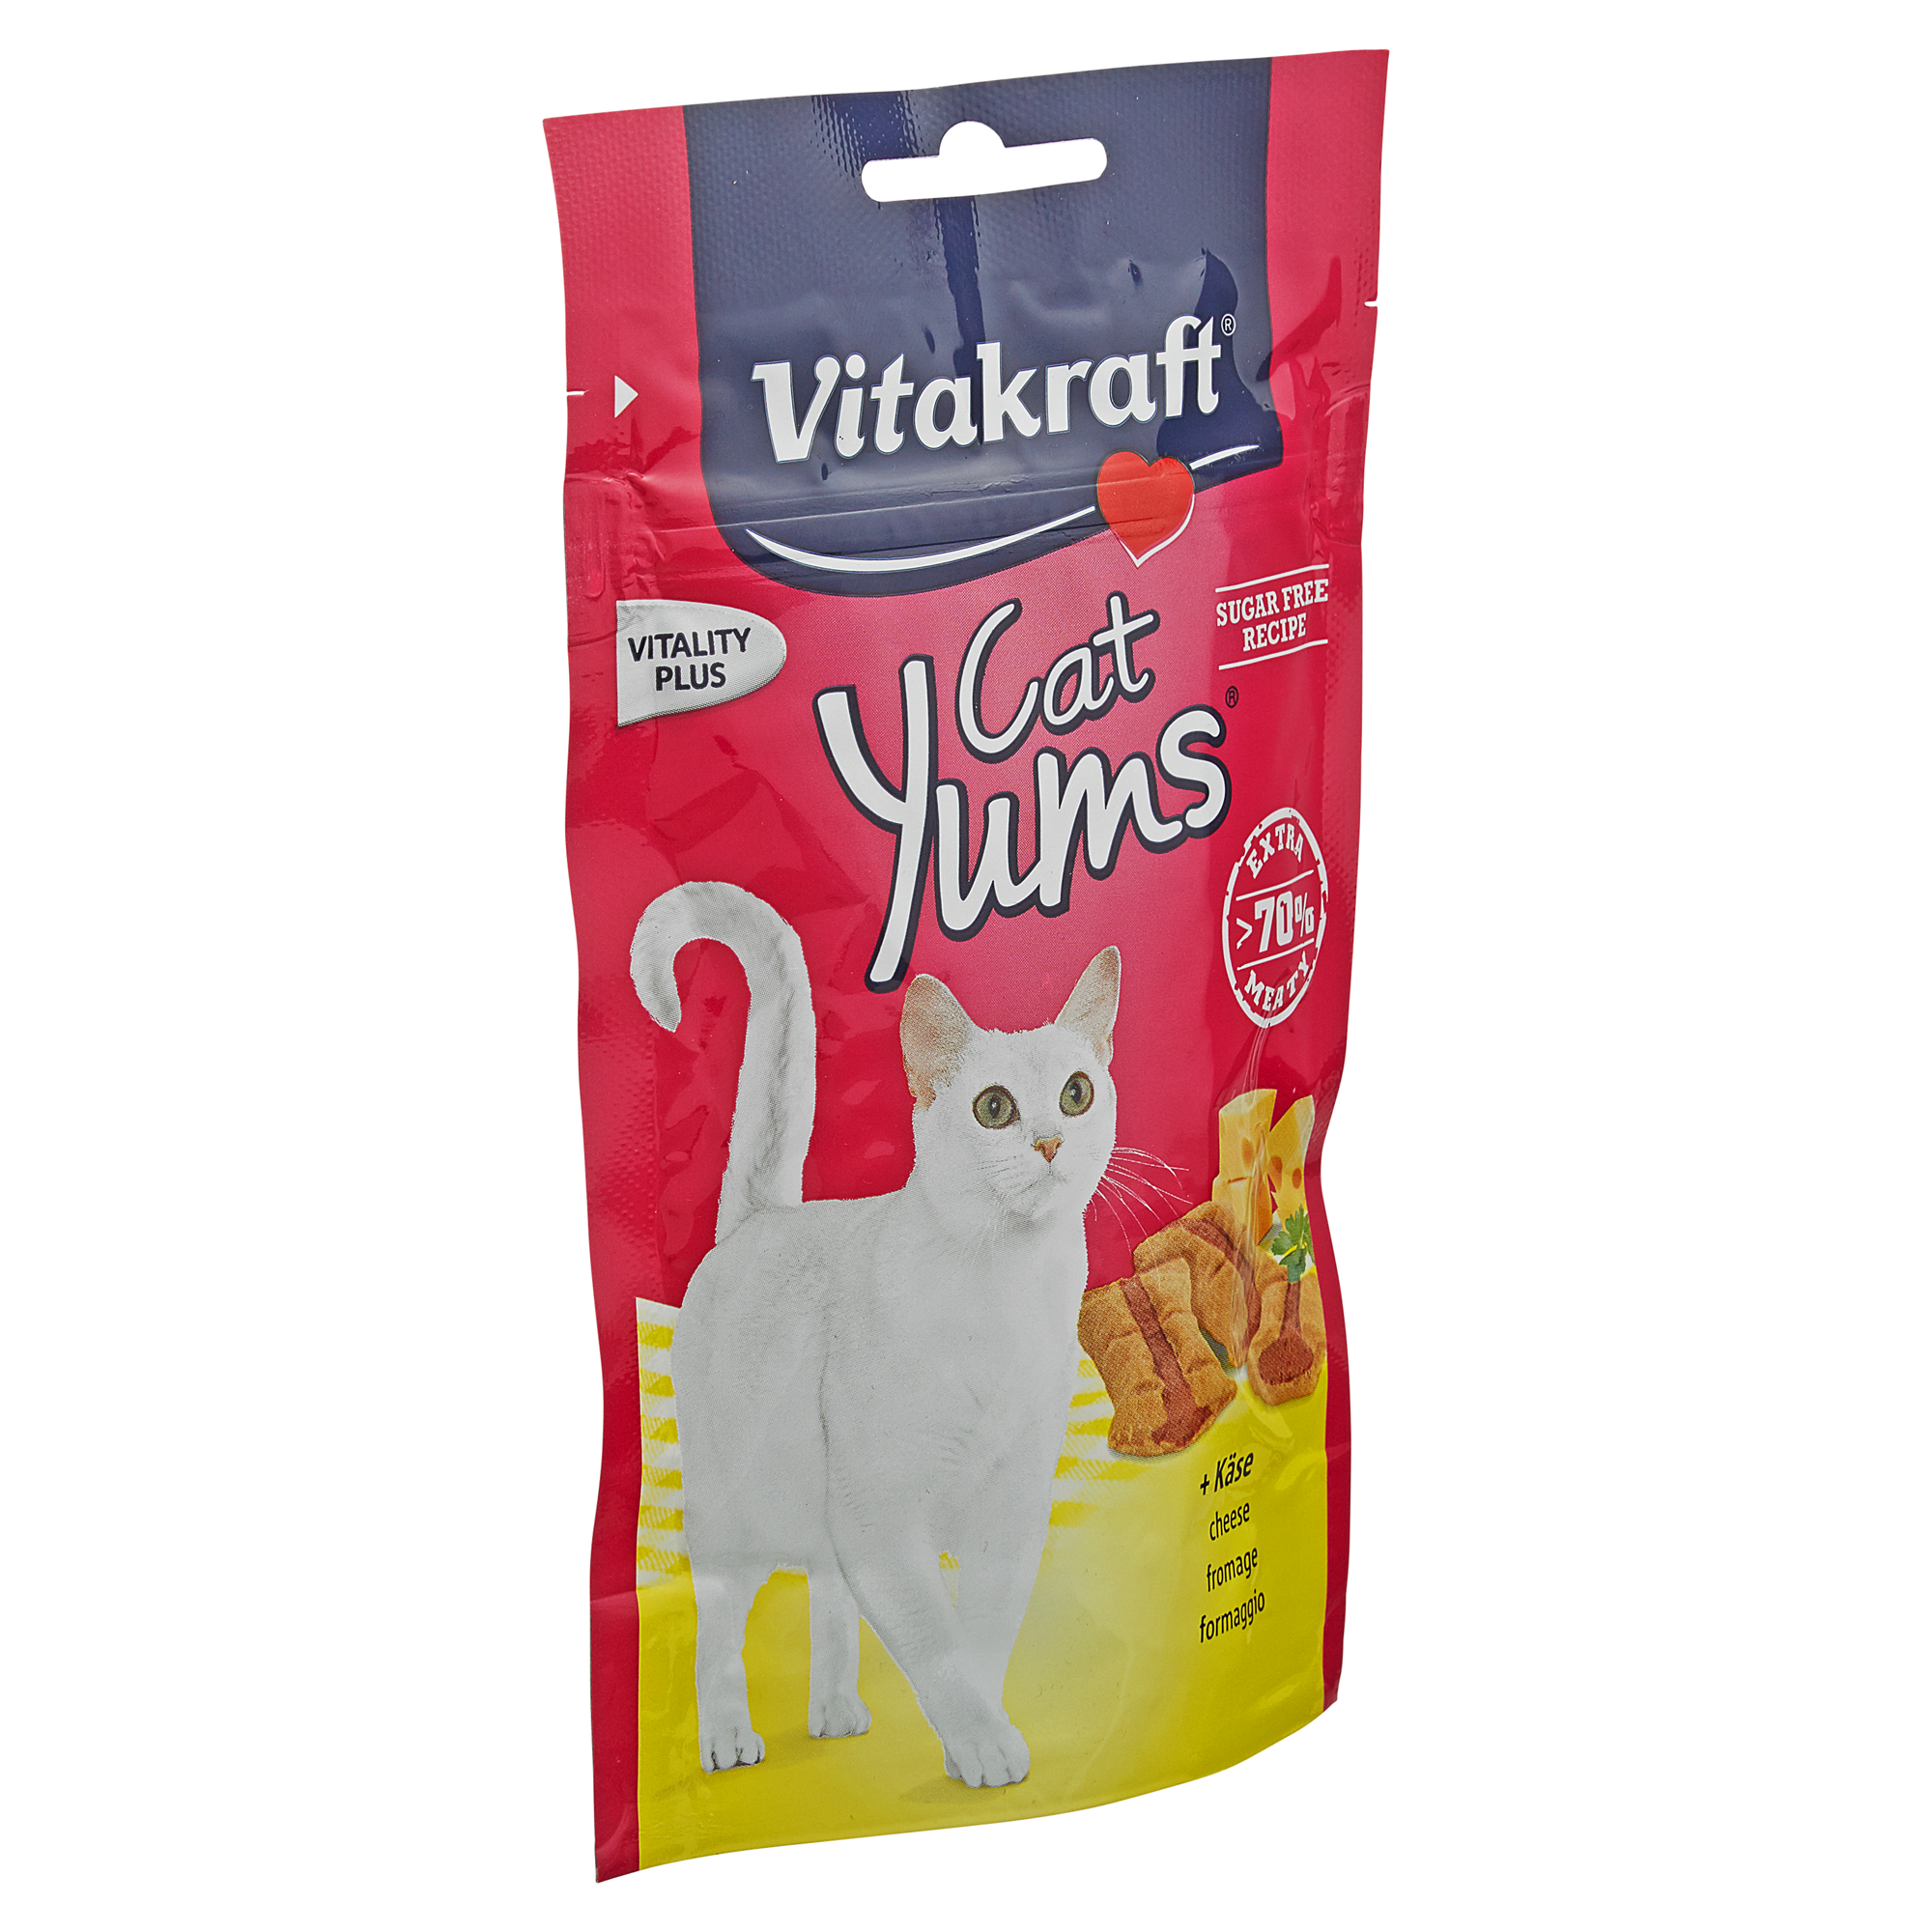 Katzensnack "Cat Yums" Käse 40 g + product picture